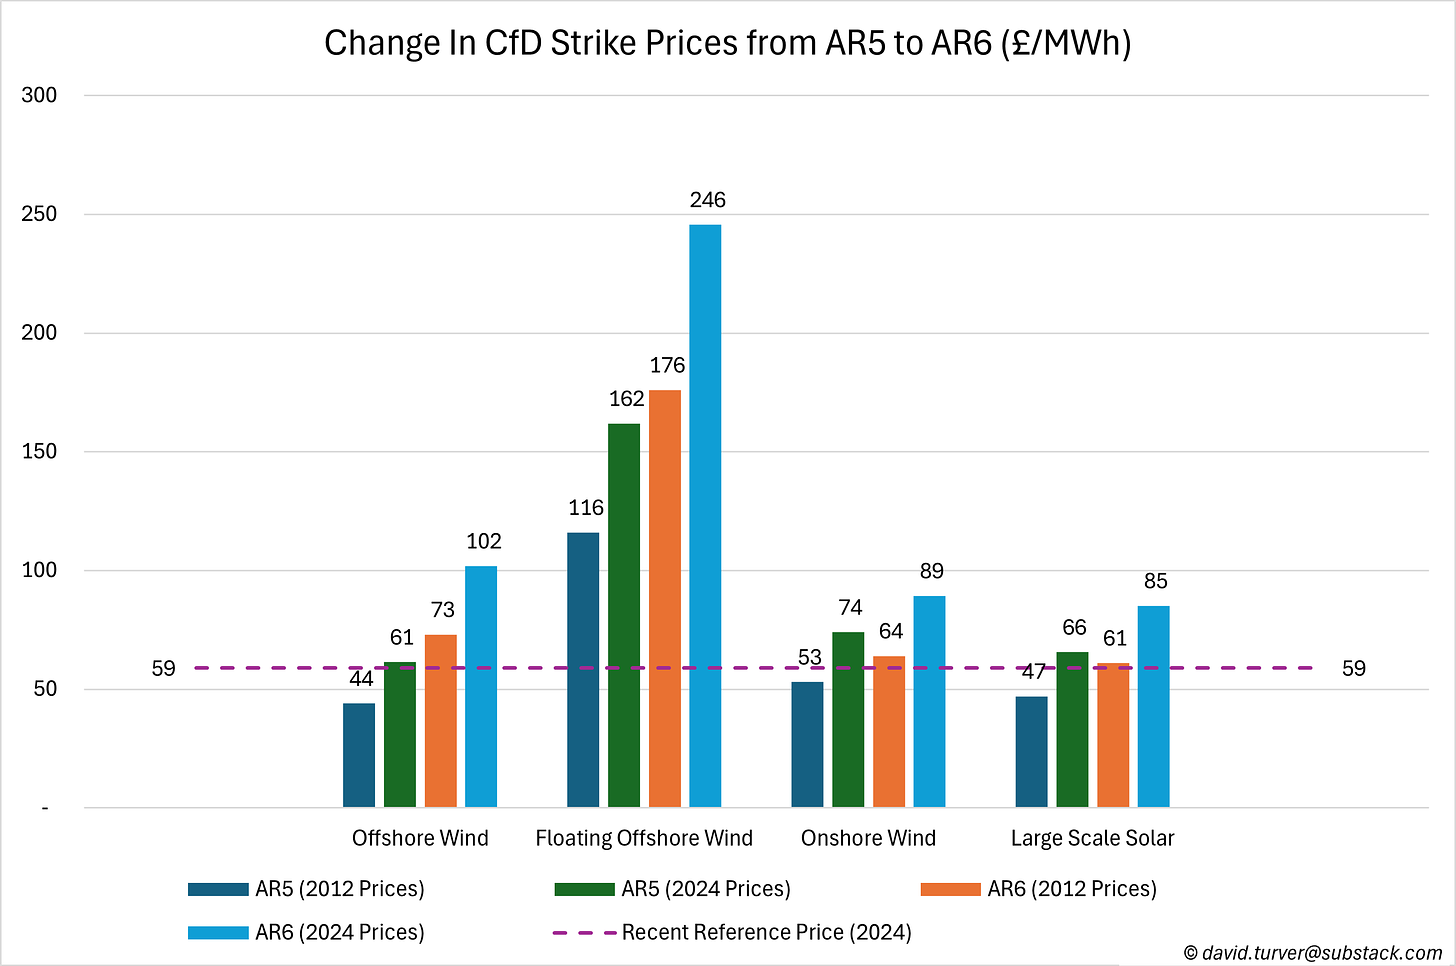 Figure 3 - Change in CfD Strike Prices from AR5 to AR6 (£ per MWh)